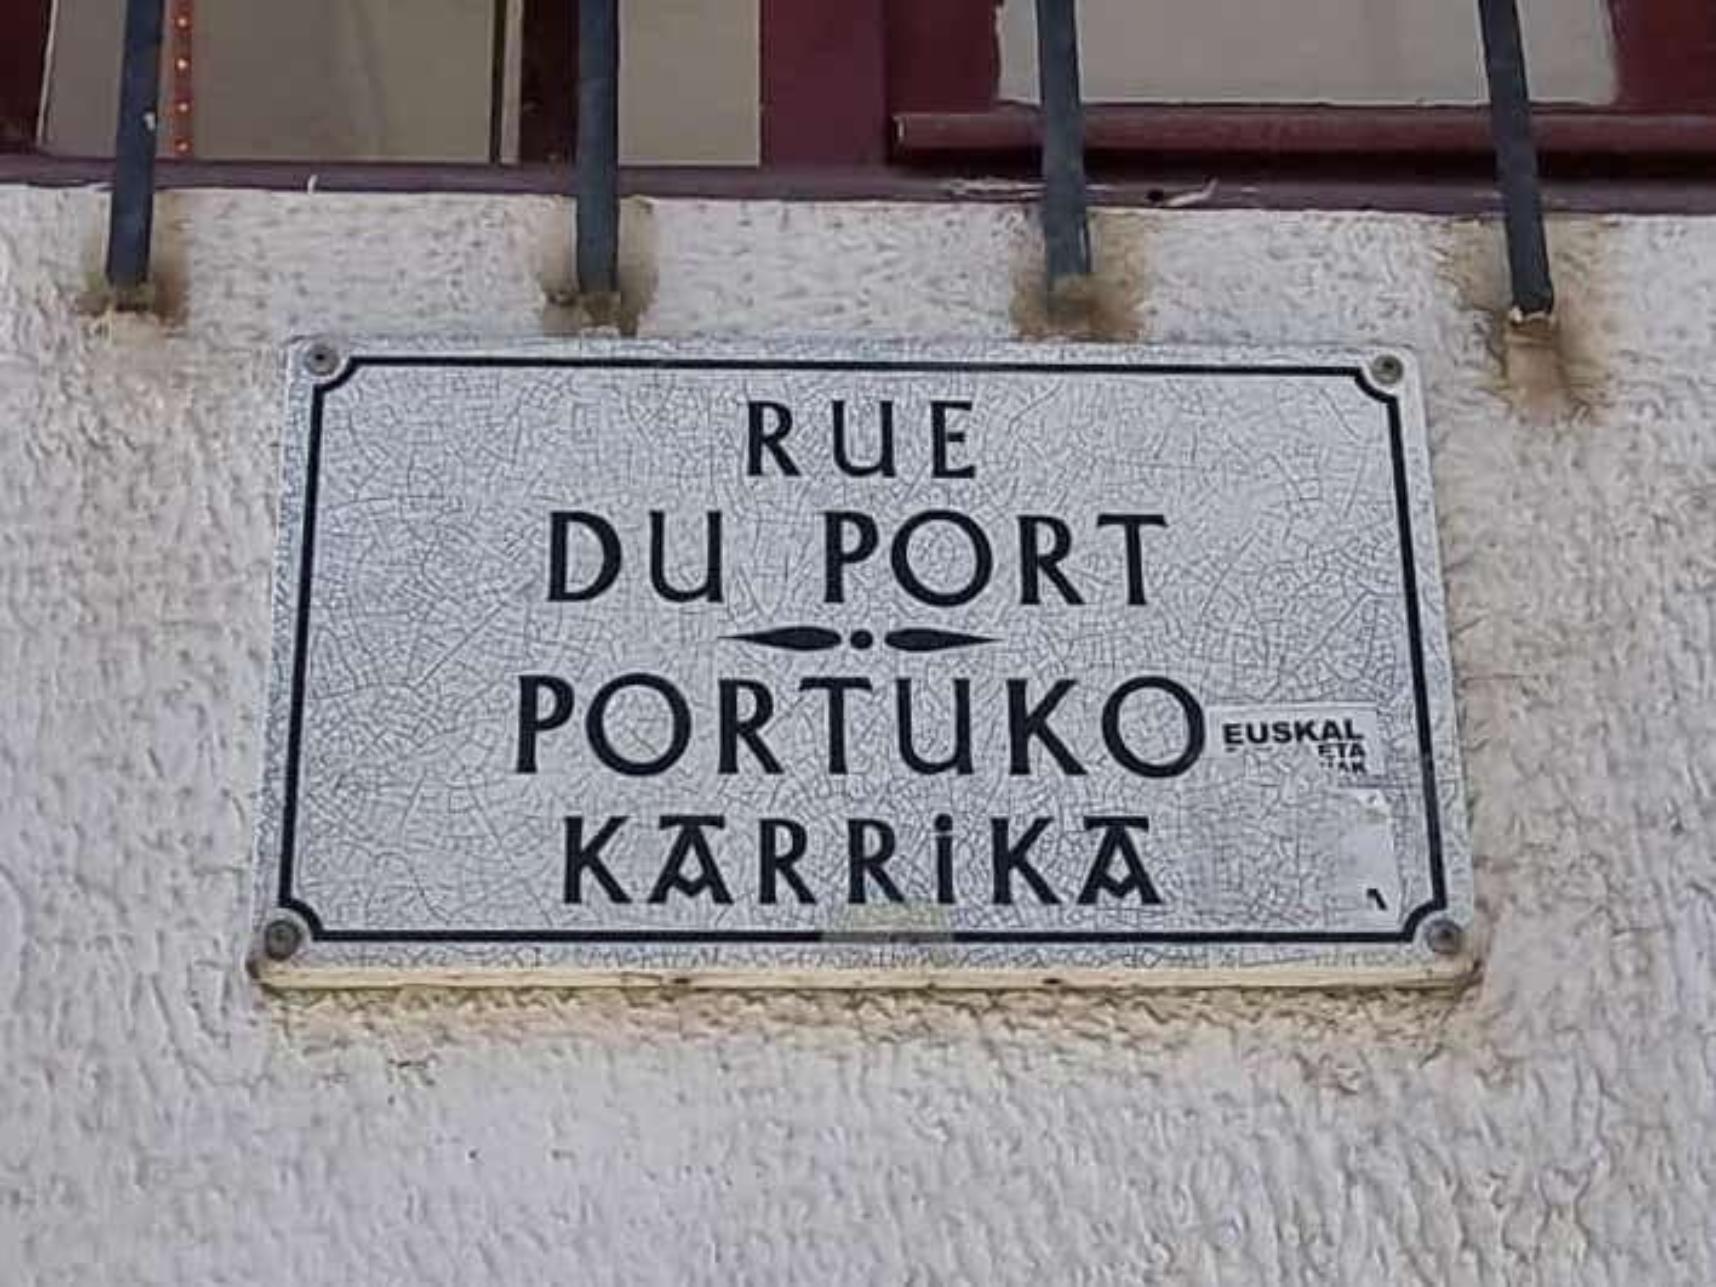 Street sign in two different languages